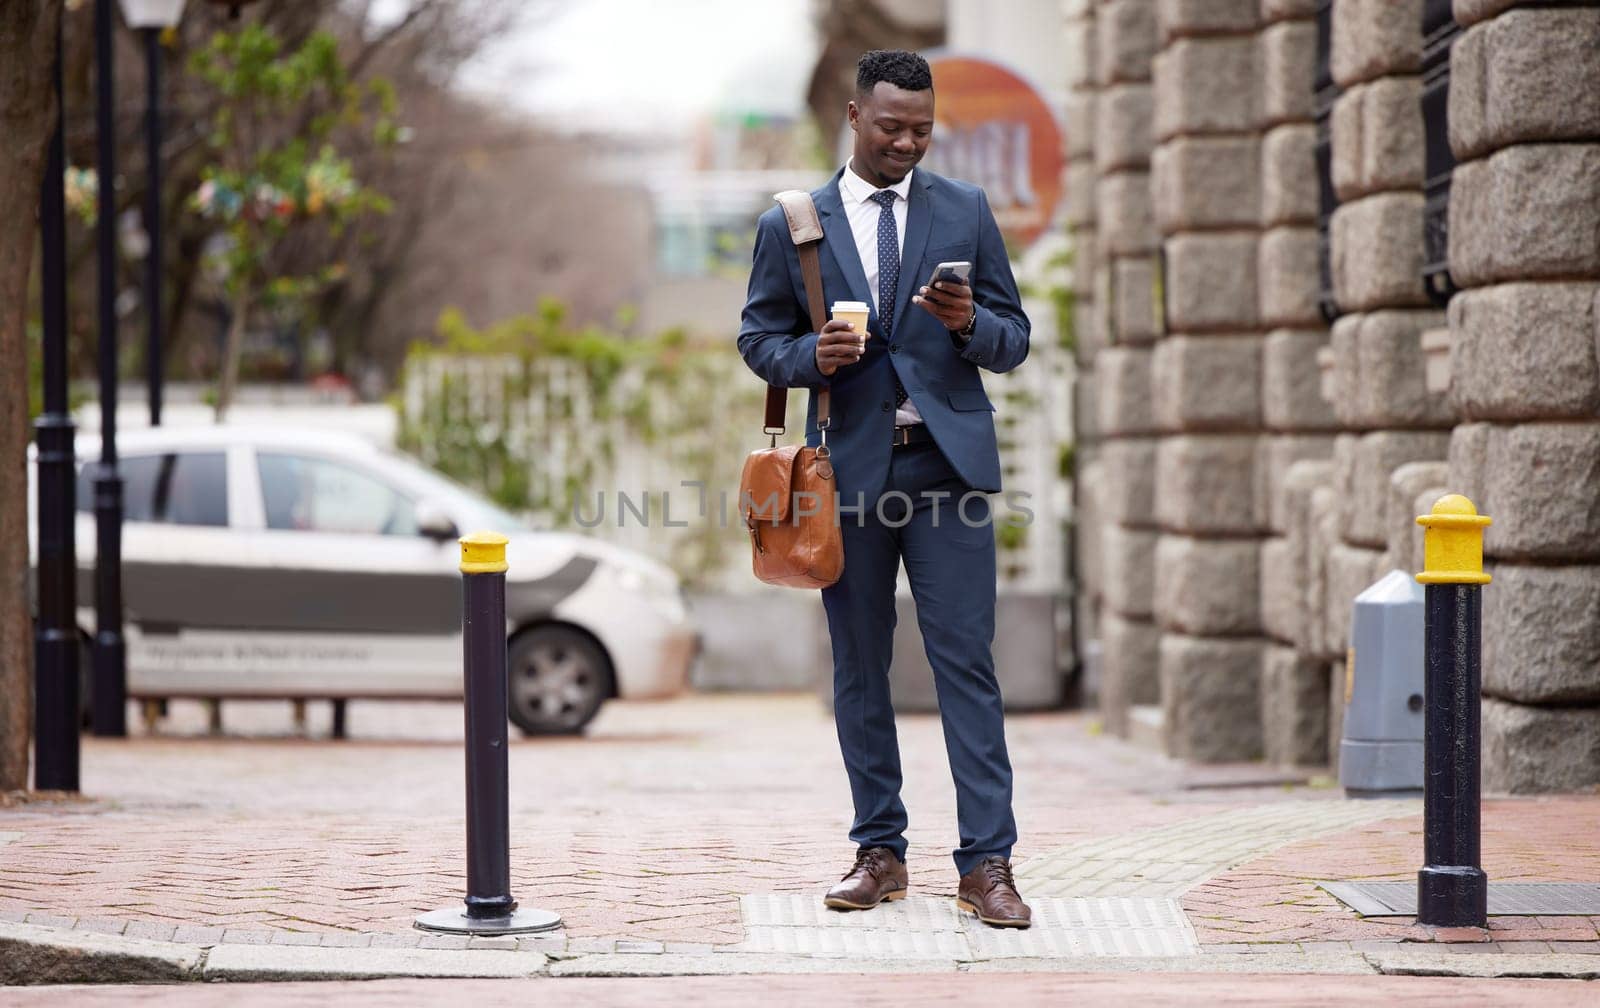 Cell phone, walk and black man in city for work commute, social media and networking in town. Travel, professional and male worked in road with coffee, smartphone and internet for texting and email by YuriArcurs